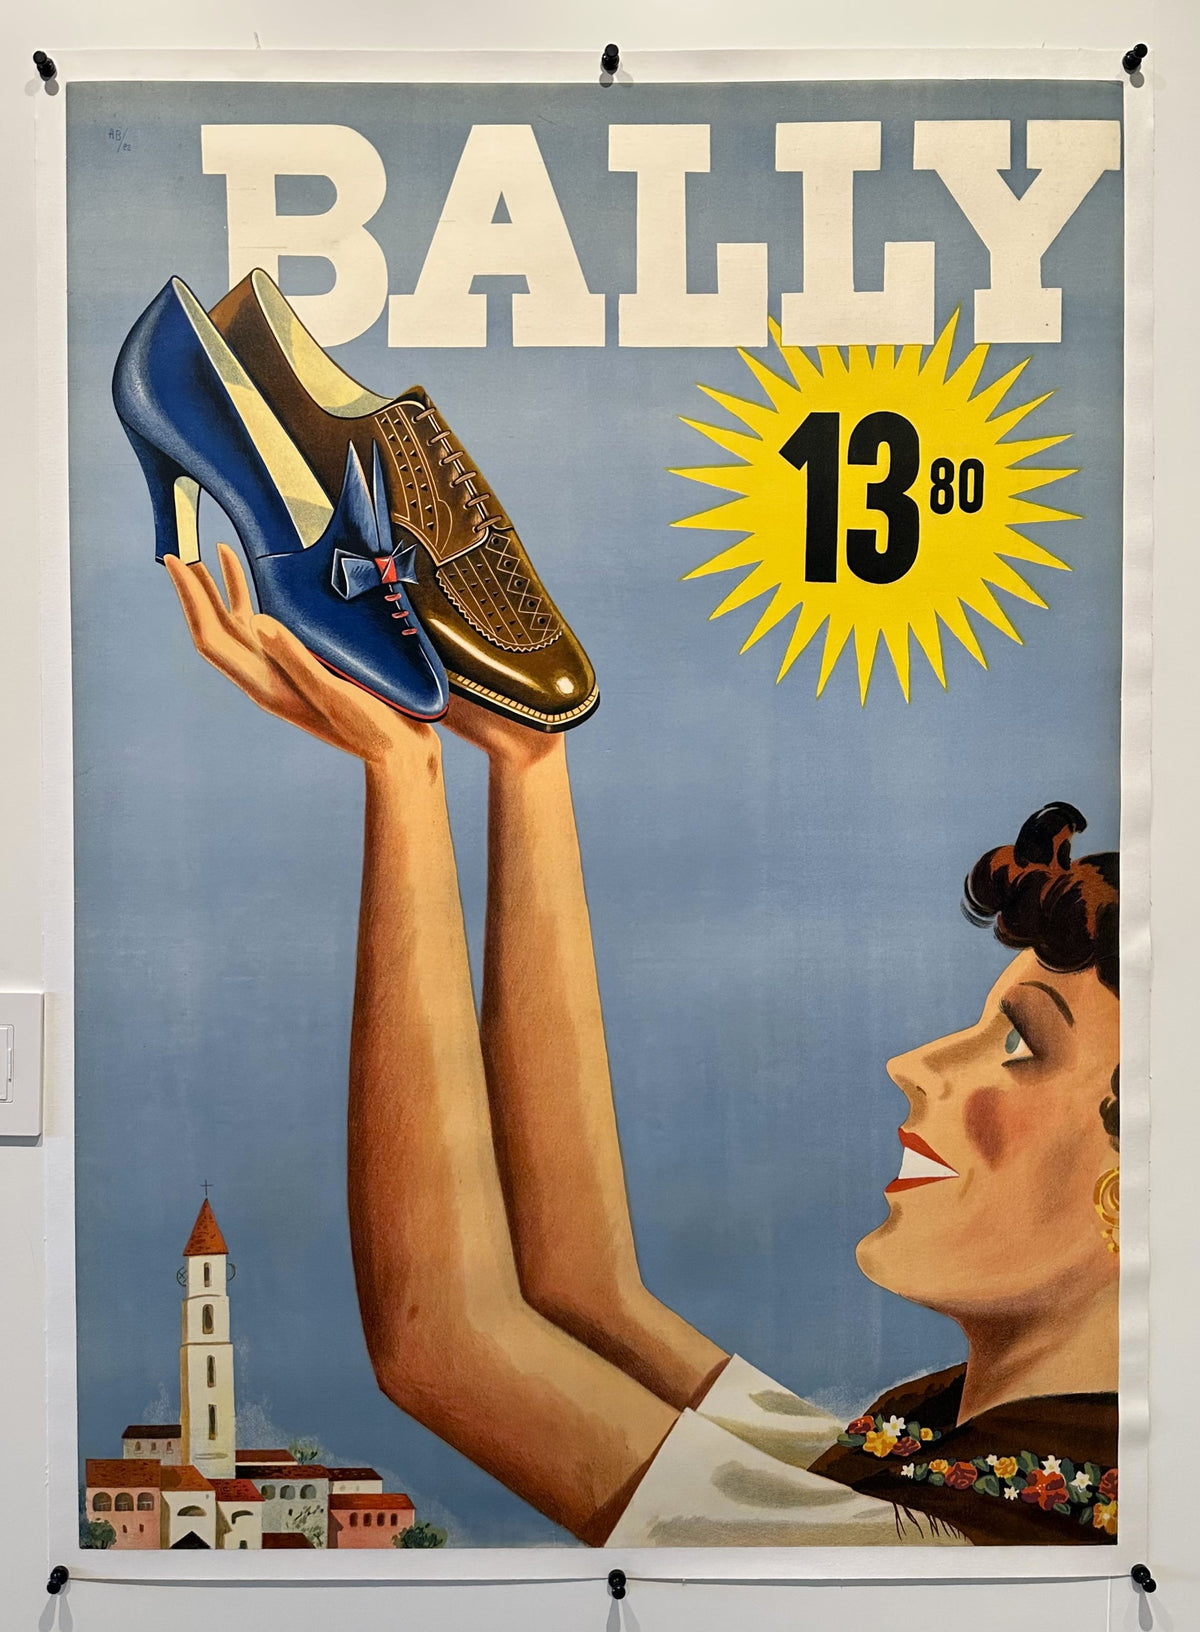 Bally Shoe Lifting - Authentic Vintage Poster